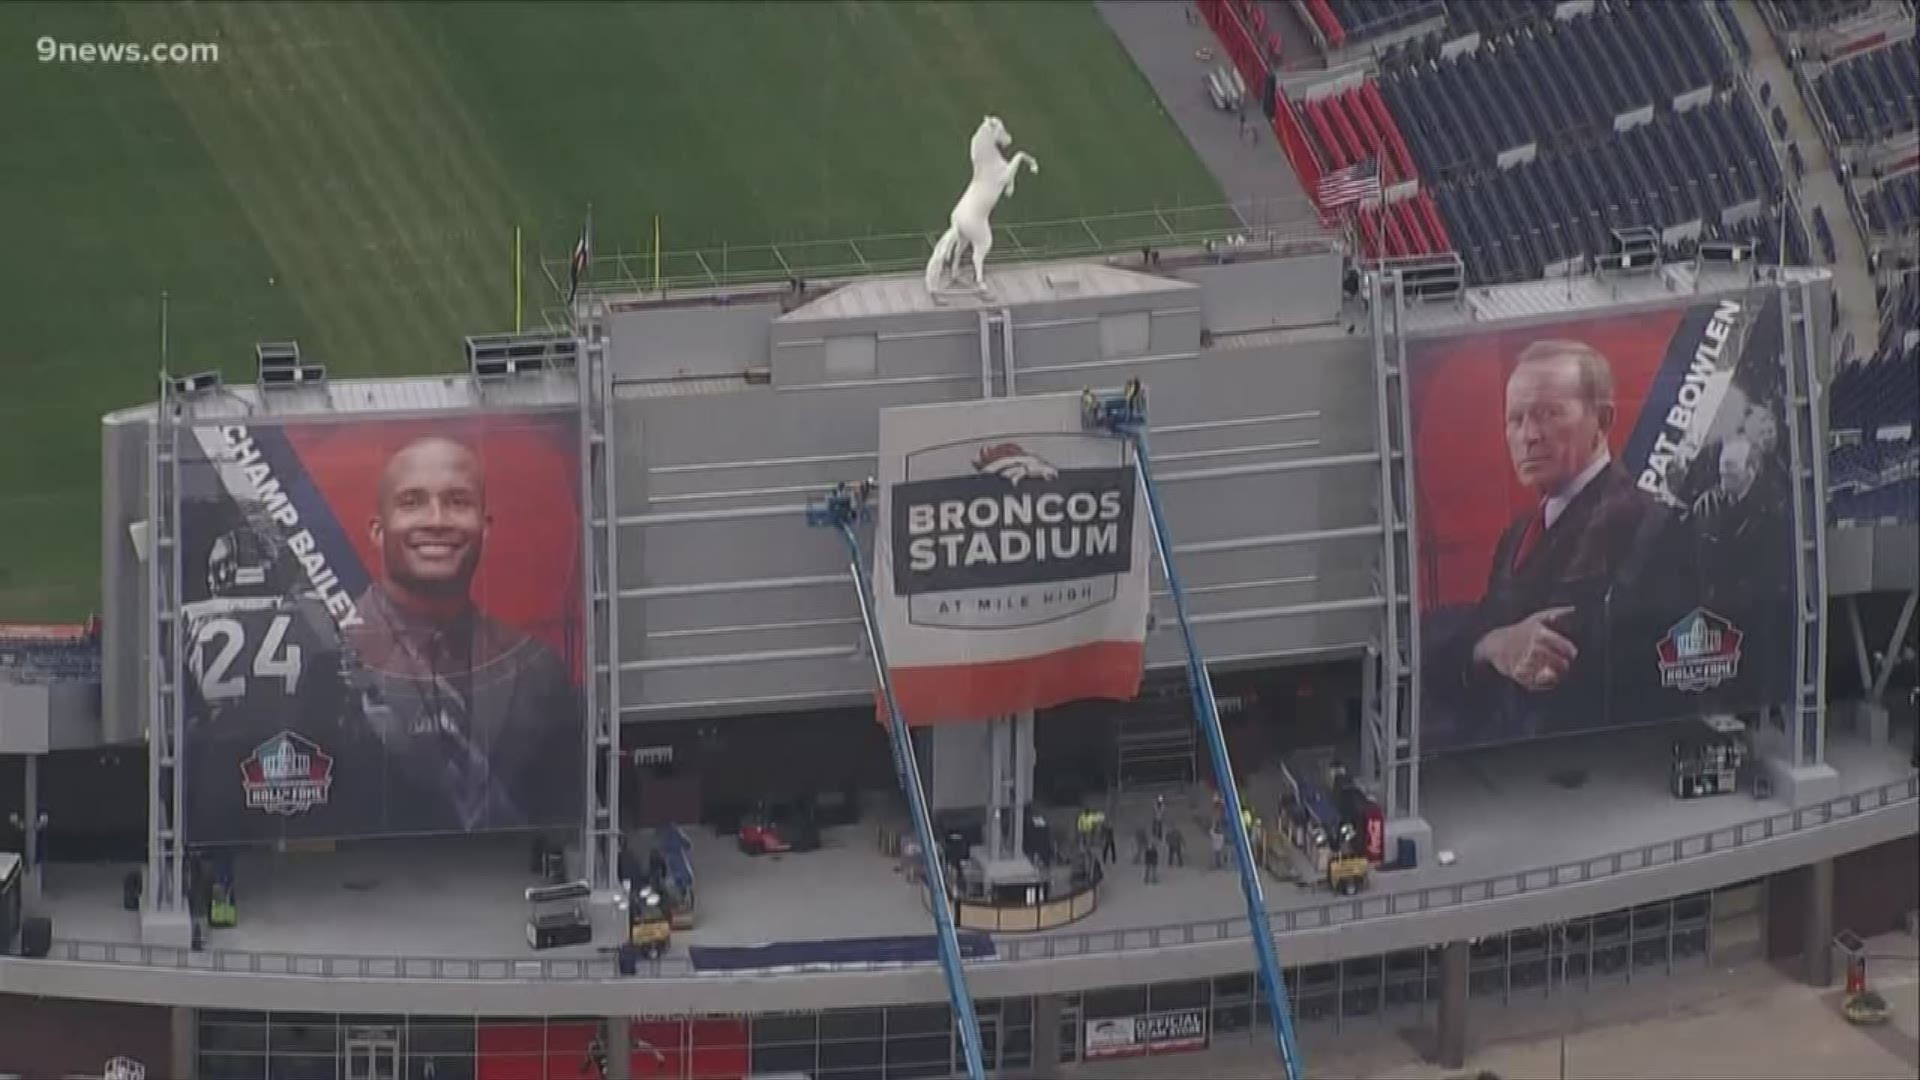 The Denver Broncos are starting the 2019 season with a new name on the stadium: Empower Field at Mile High.